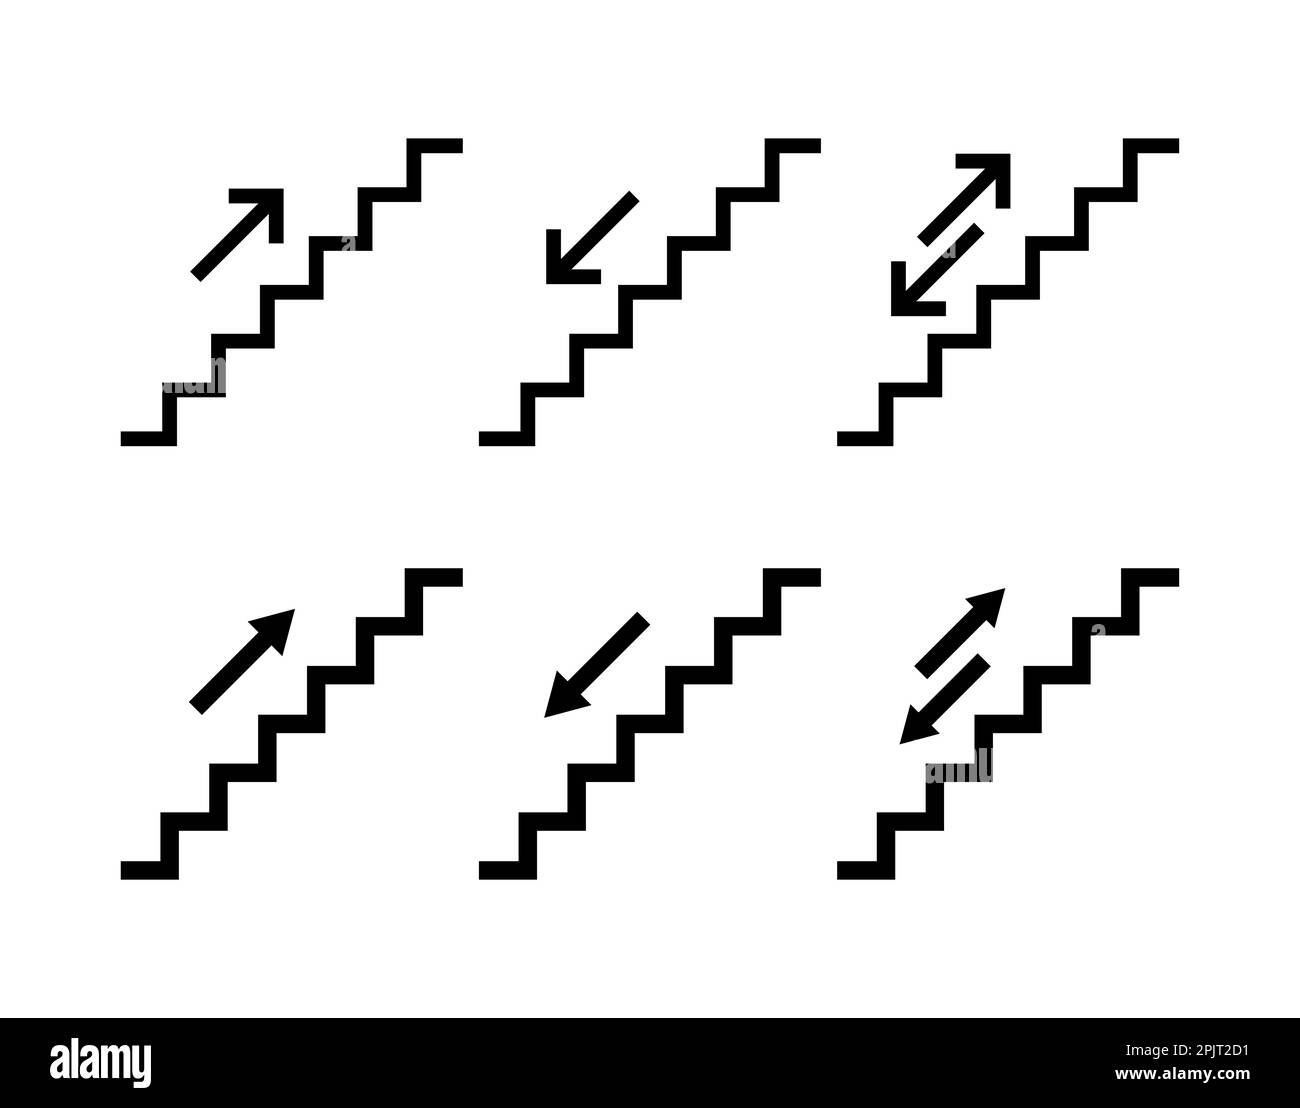 Man walking stairs, up and down movement. Emergency evacuation Stock Vector